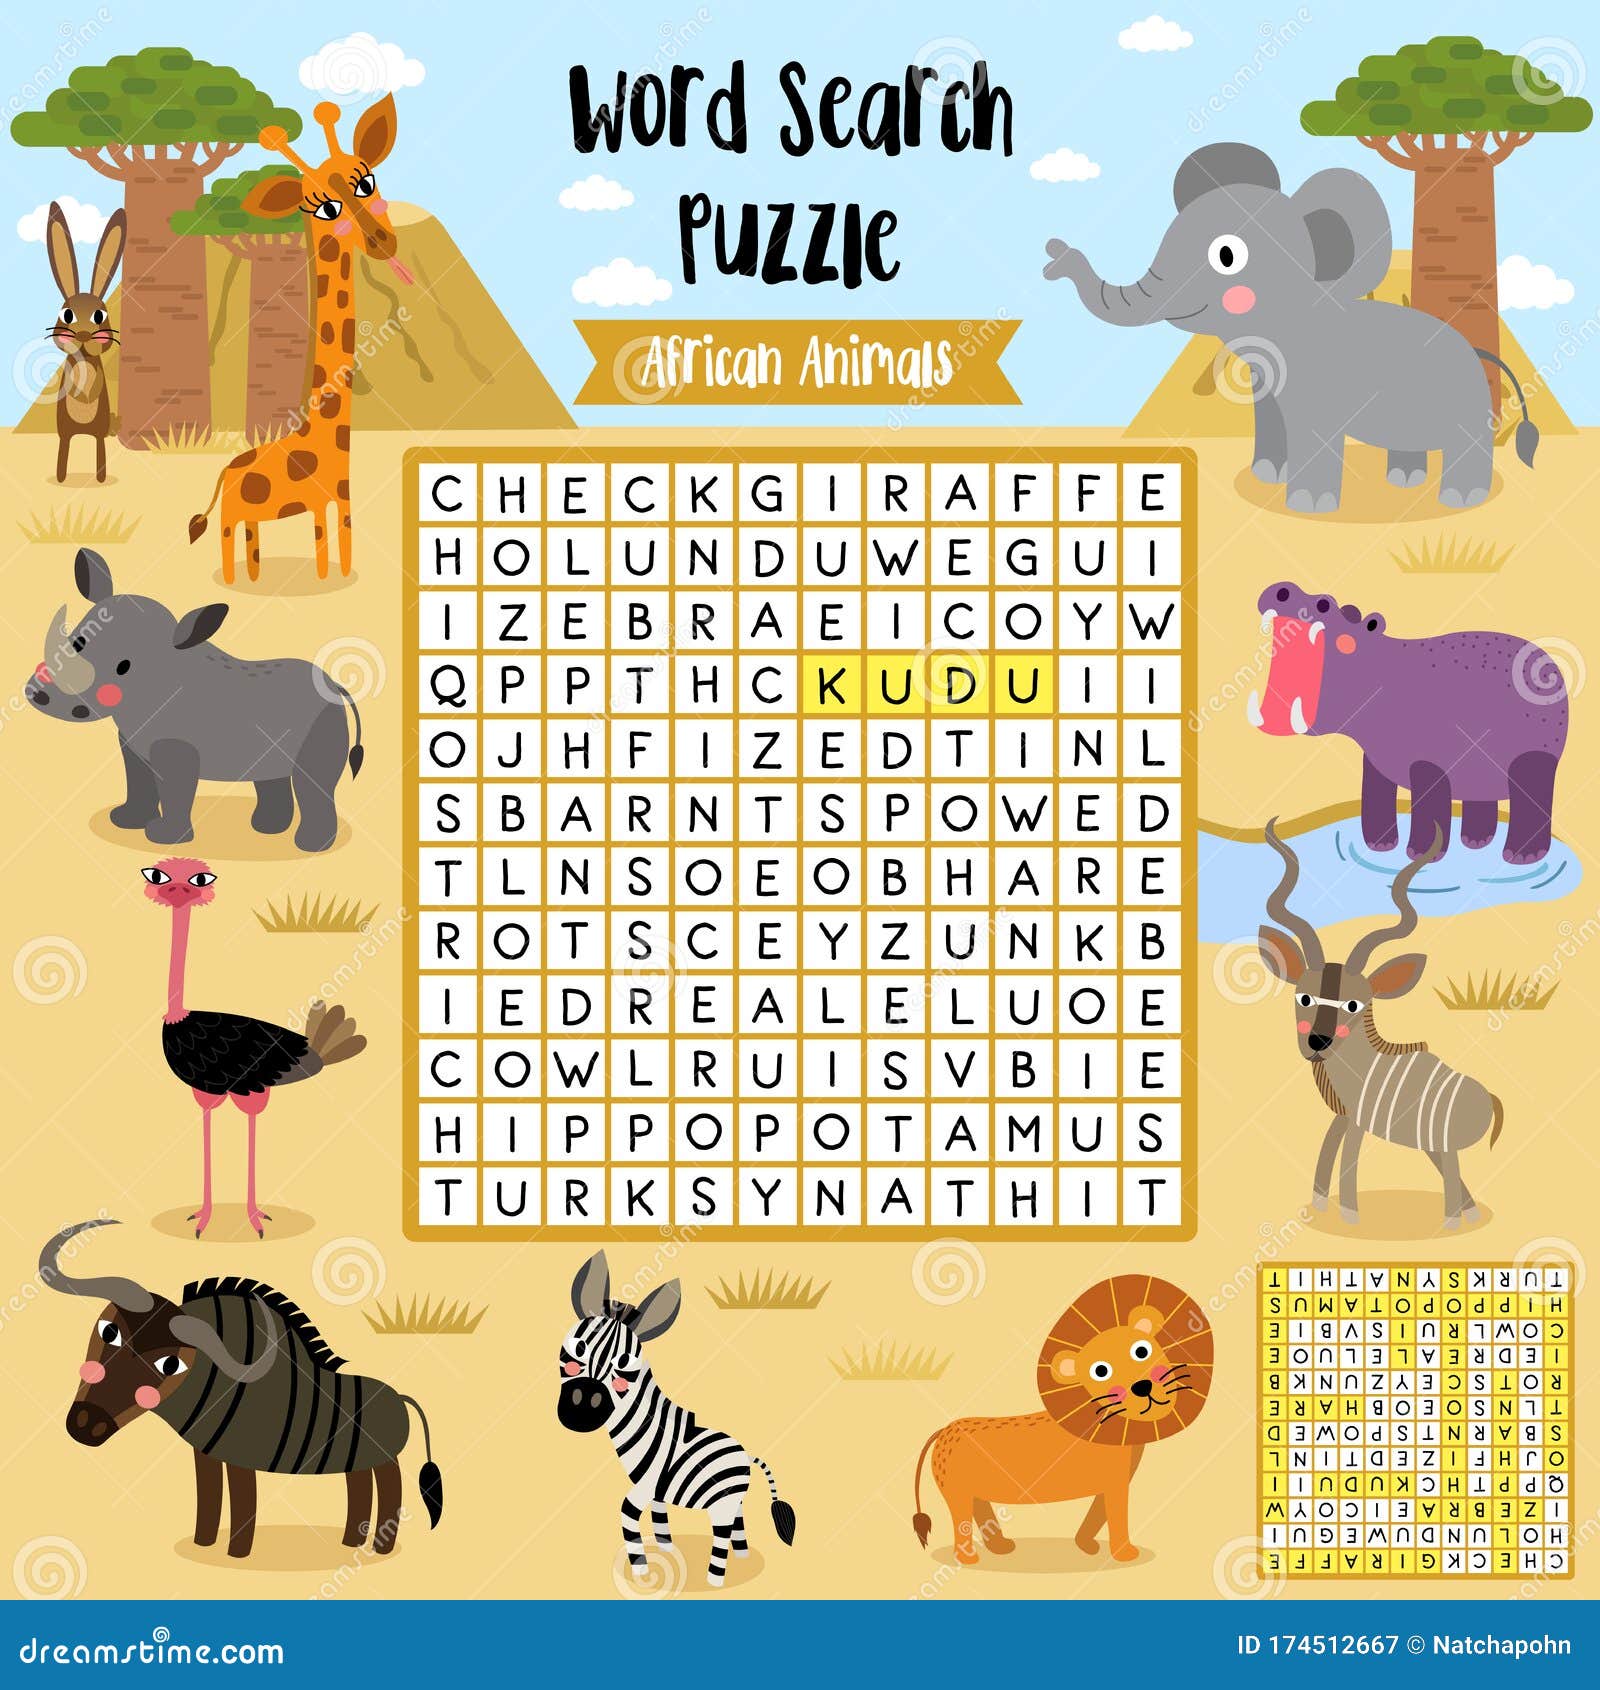 Animal search. Animal Wordsearch. Animals Wordsearch for Kids. Wild animals Wordsearch. Word search animals for Kids.